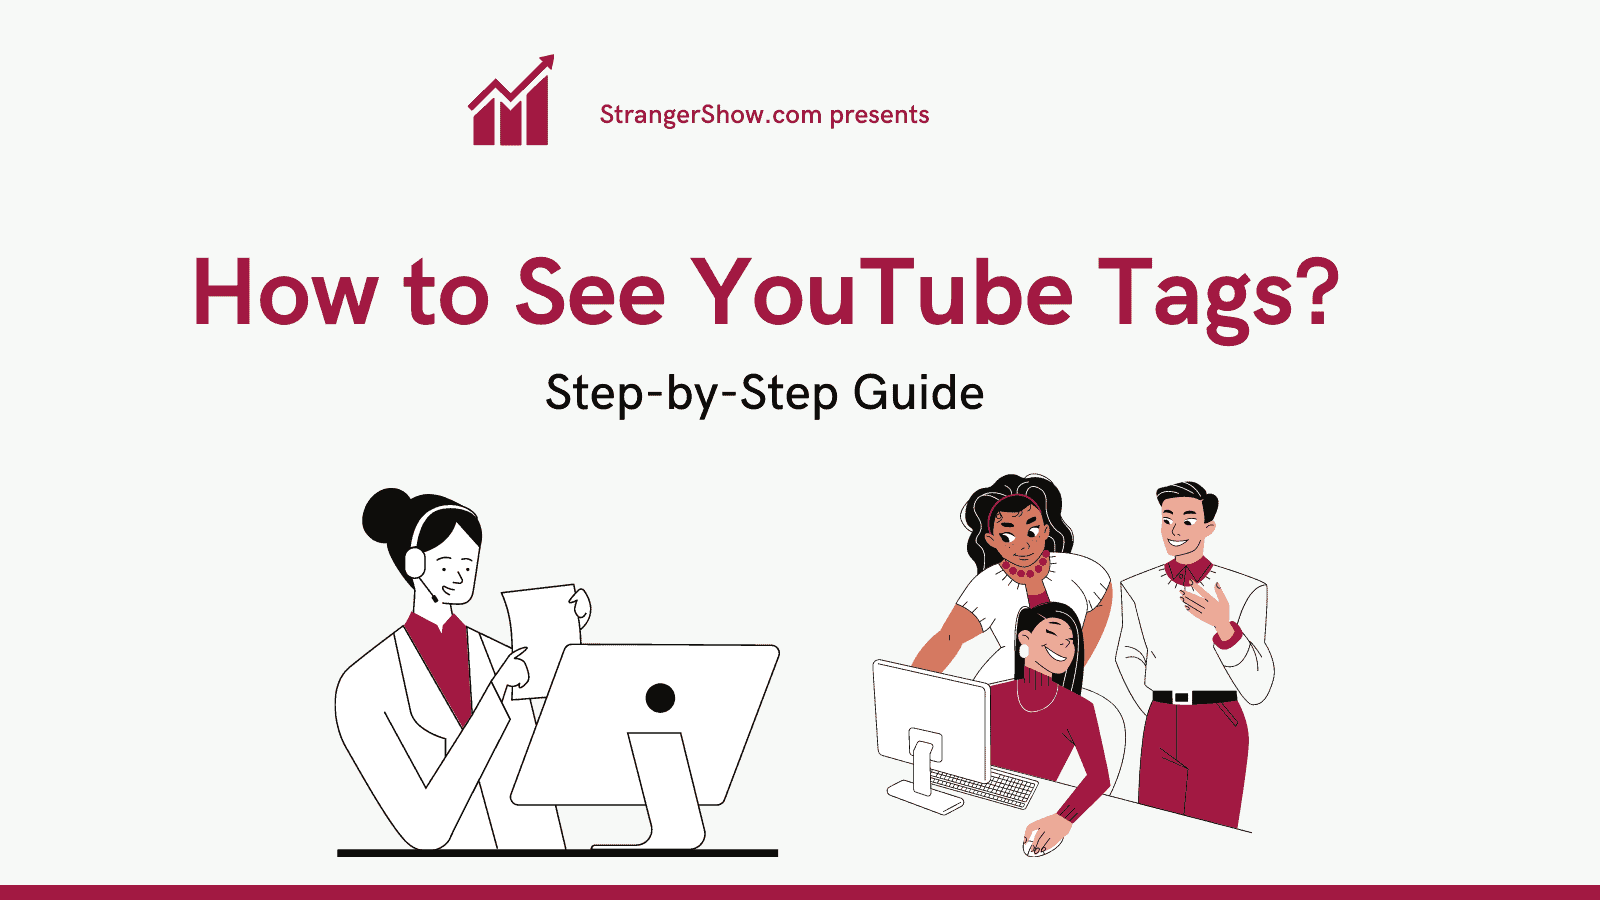 How to see YouTube Tags